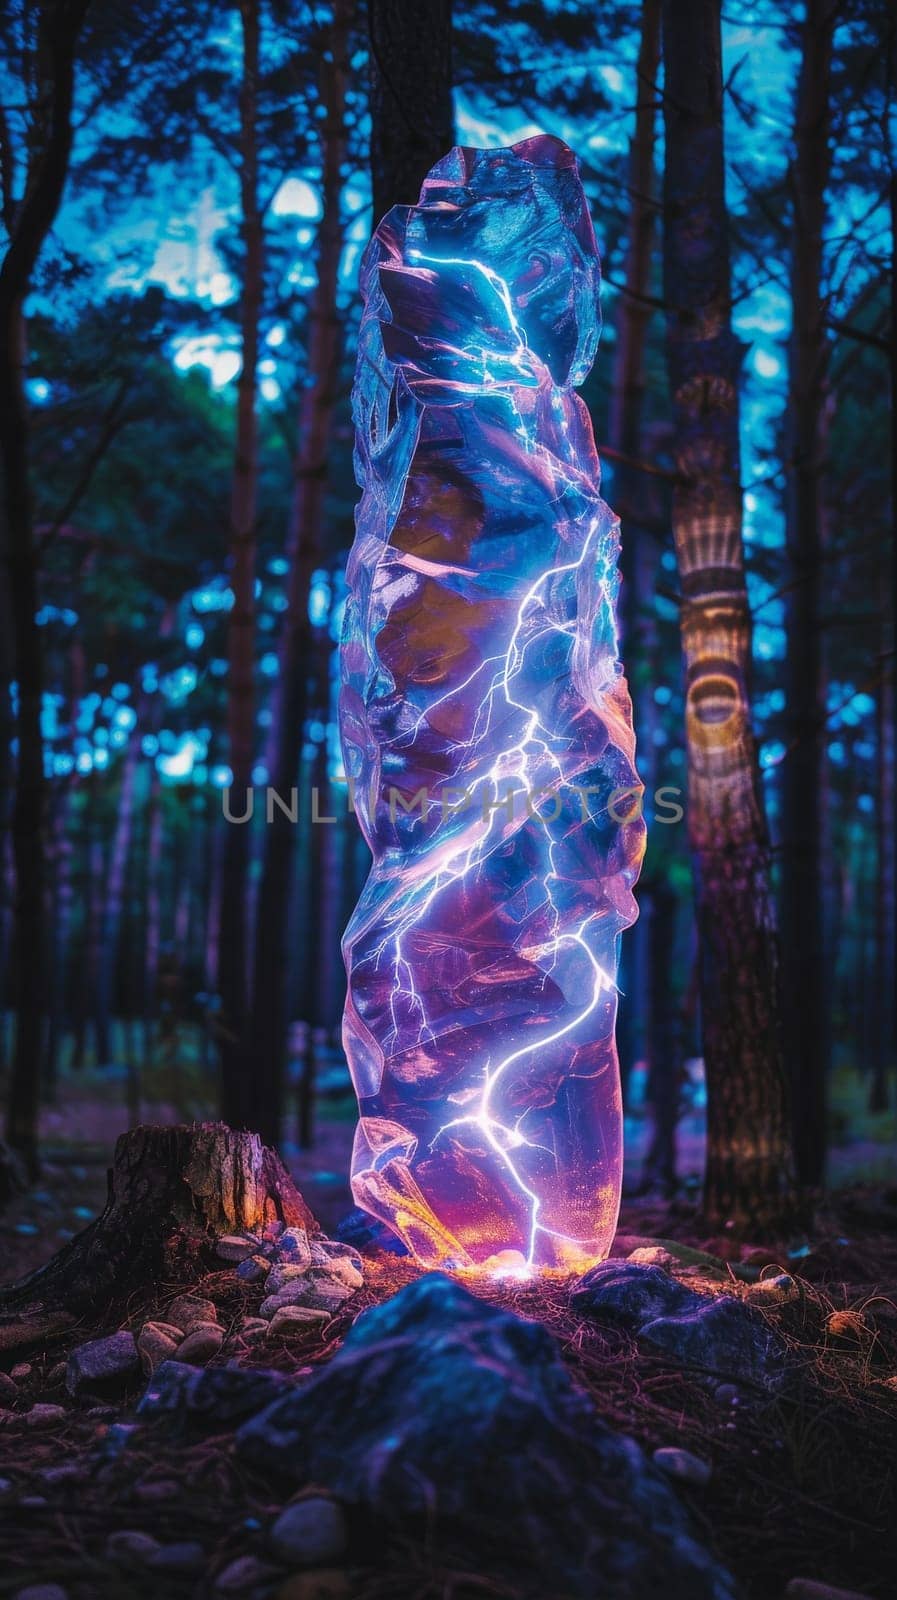 A large rock with a blue lightning bolt on it. The rock is surrounded by trees and the sky is dark